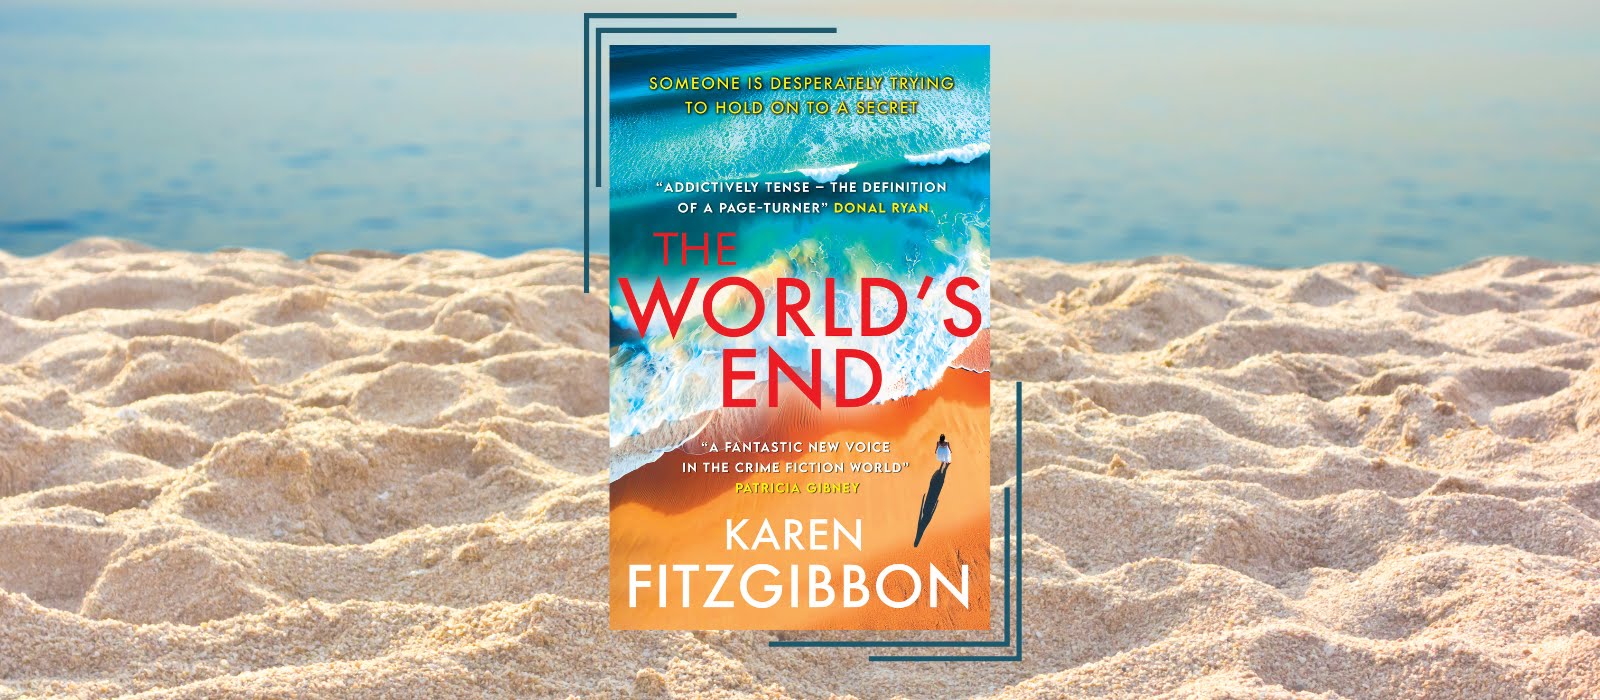 Read an extract from Karen Fitzgibbon’s debut, The World’s End